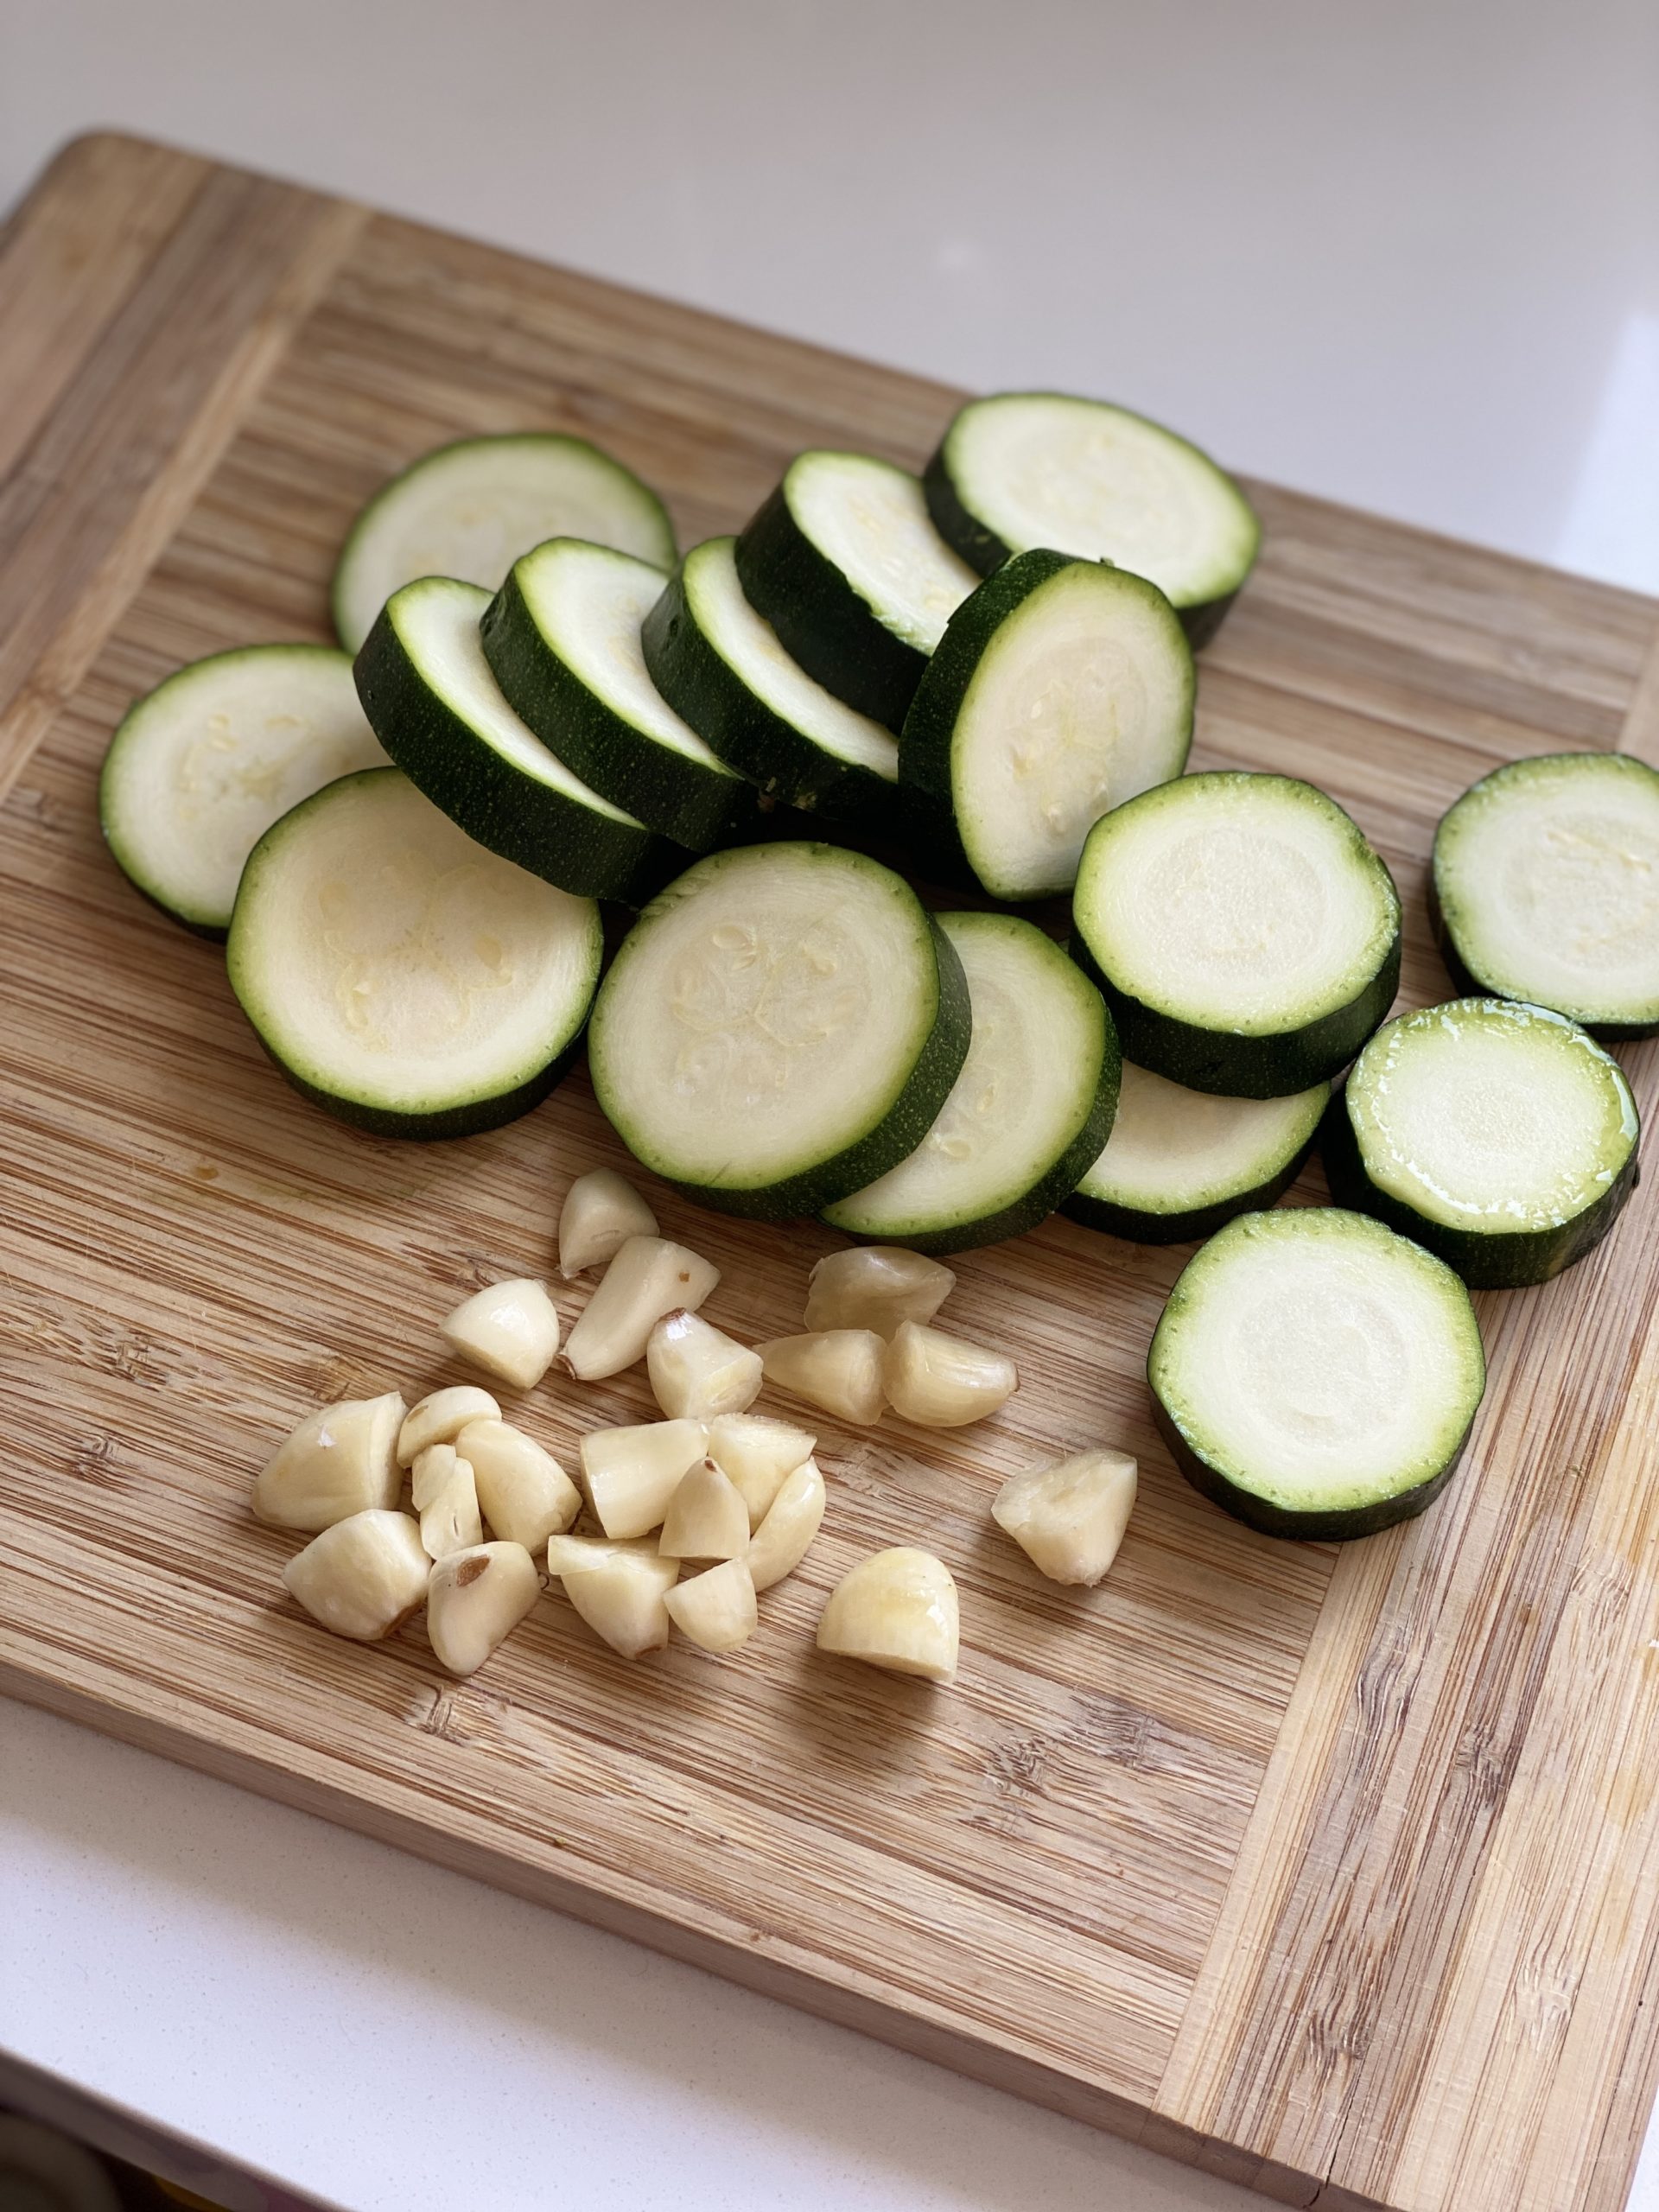 Cut the zucchini and chop up the garlic cloves